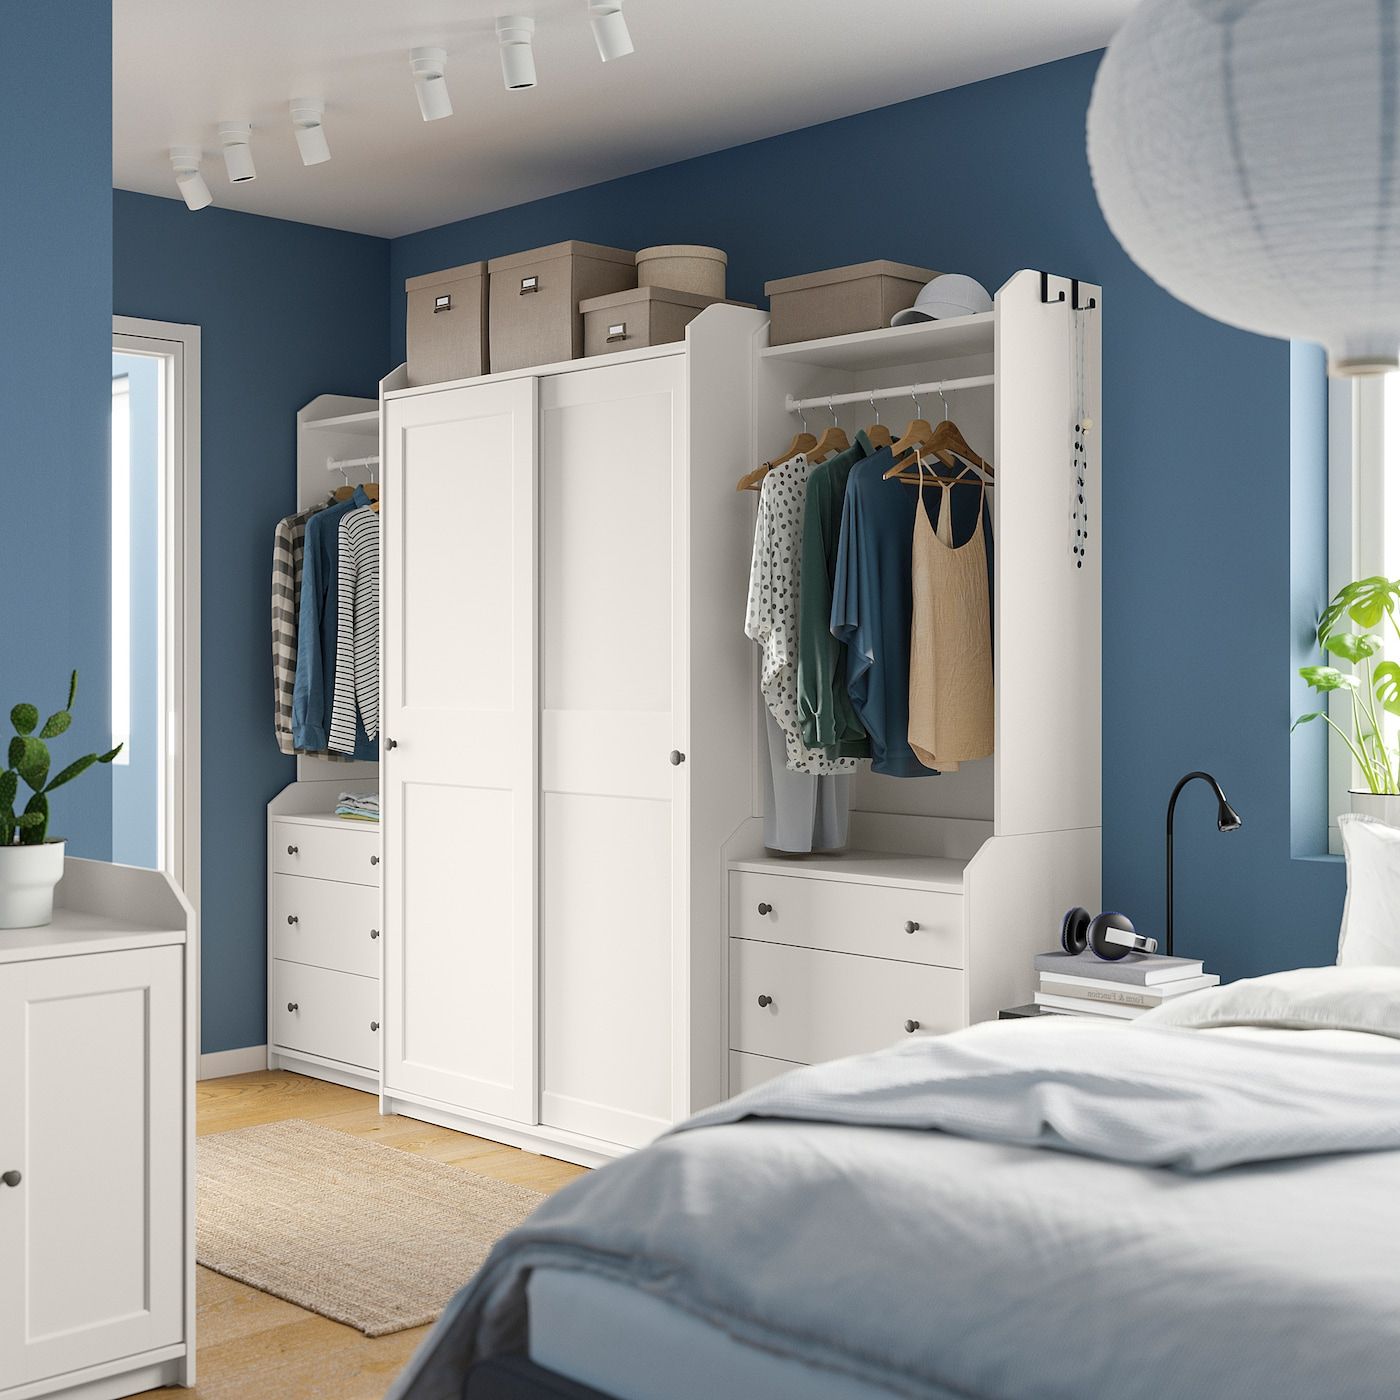 Hauga Wardrobe Combination, White, 1015/8x215/8x783/8" – Ikea Within Wardrobes And Chest Of Drawers Combined (Gallery 7 of 20)